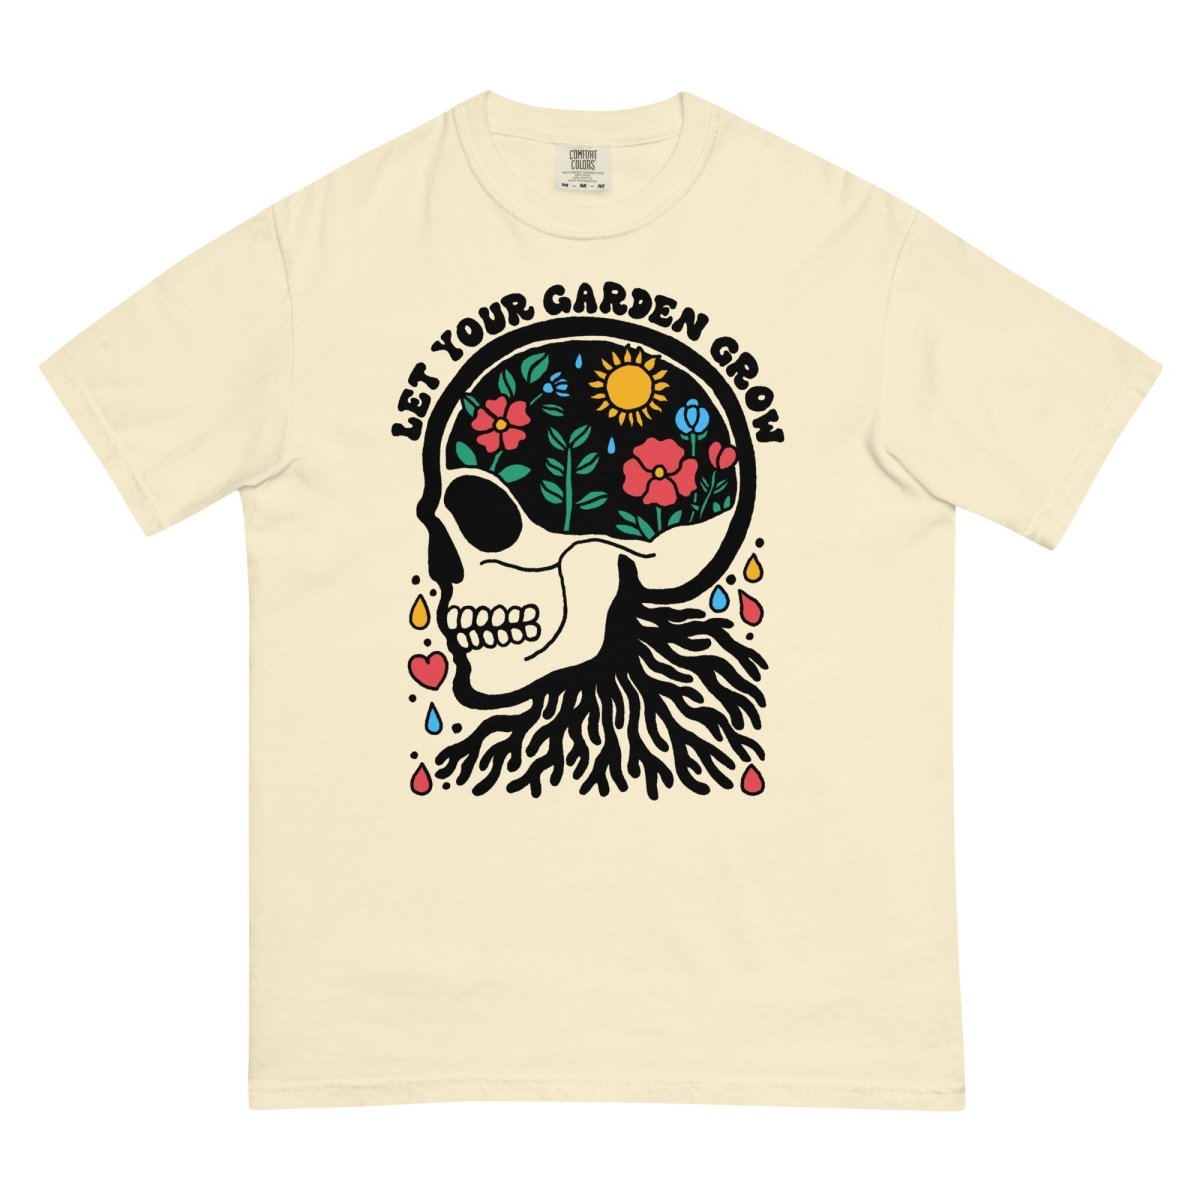 Let your garden grown tshirt - Pretty Bad Co.